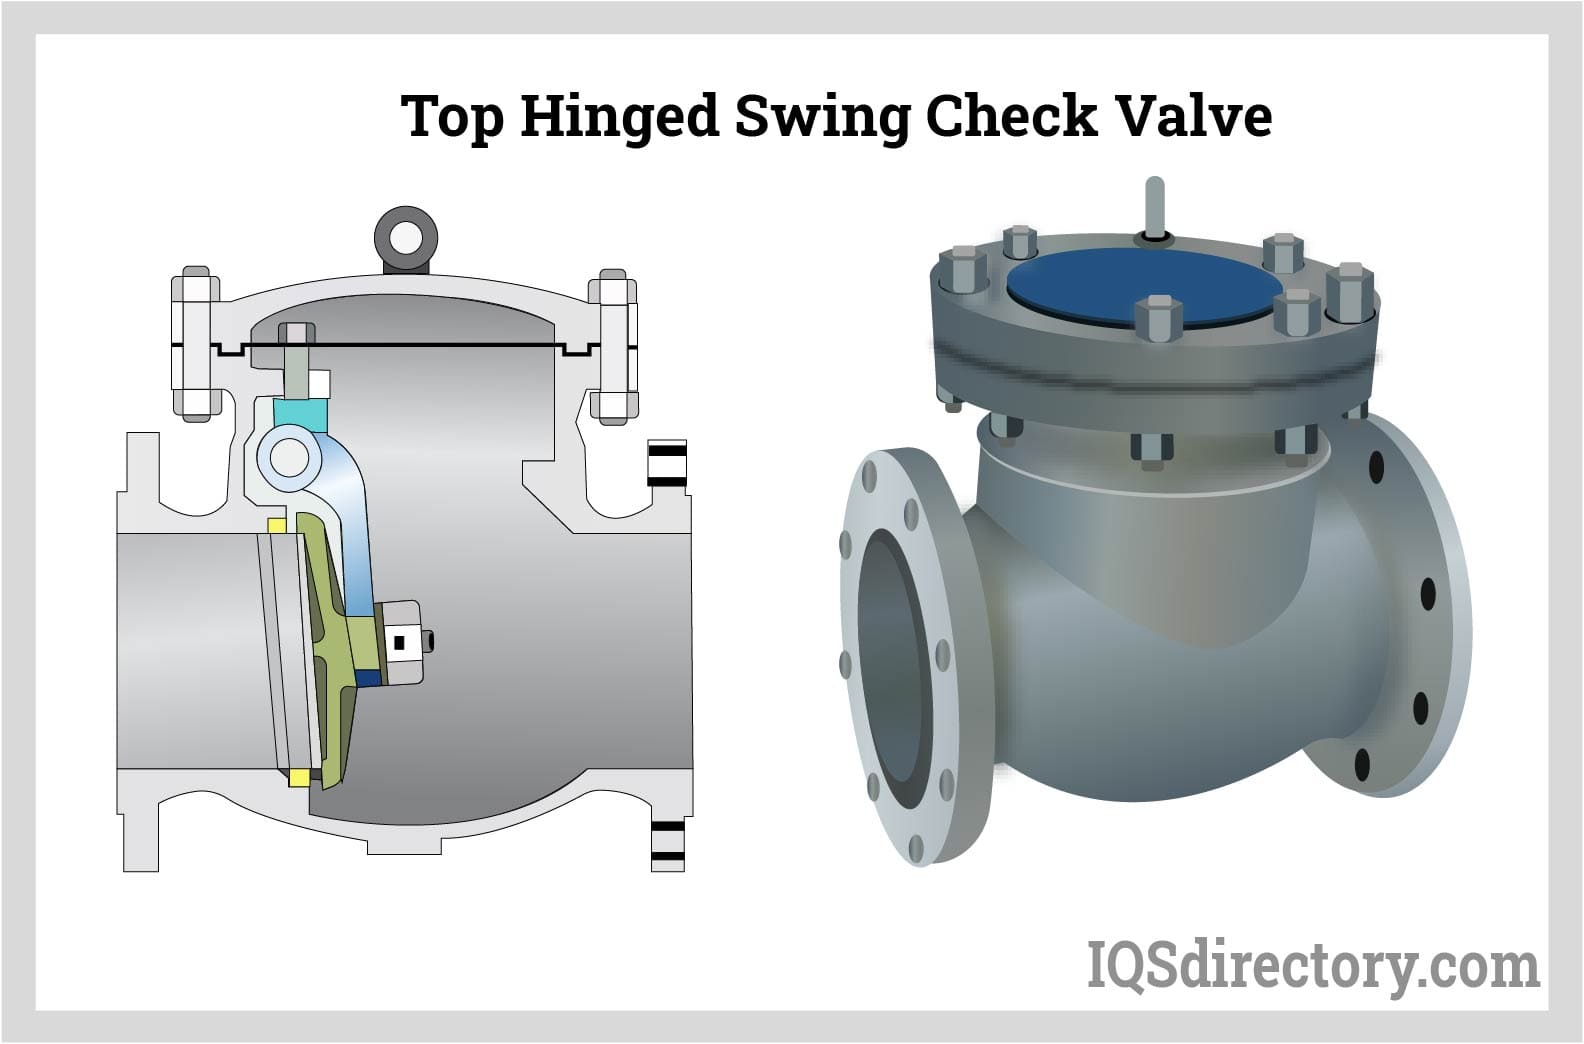 Top Hinged Swing Check Valve